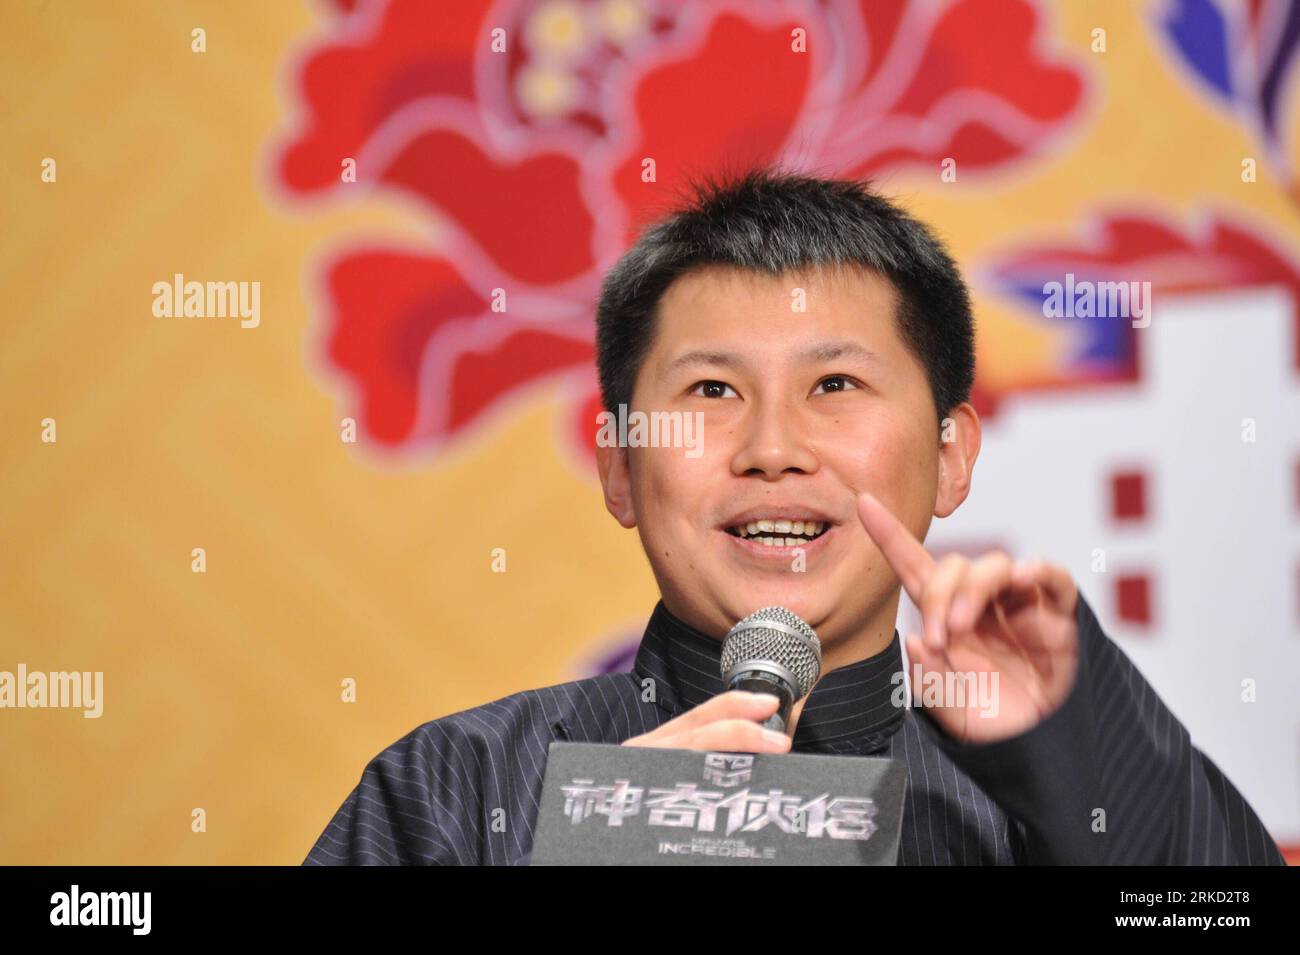 Bildnummer: 54848125  Datum: 24.01.2011  Copyright: imago/Xinhua (110124) -- BEIJING, Jan. 24, 2011 (Xinhua) -- Actor He Yunwei attends a premiere press conference of the comedy film Mr. and Mrs. Incredible in Beijing, capital of China, Jan. 24, 2011. The comedy film directed by Vincent Kok will be staged on Feb. 3. (Xinhua/Ji Guoqiang) (mcg) CHINA-BEIJING-FILM MR. AND MRS. INCREDIBLE -PREMIERE PRESS CONFERENCE (CN) PUBLICATIONxNOTxINxCHN People Kultur Entertainment Film Pressetermin Porträt kbdig xdp 2011 quer    Bildnummer 54848125 Date 24 01 2011 Copyright Imago XINHUA 110124 Beijing Jan 24 Stock Photo